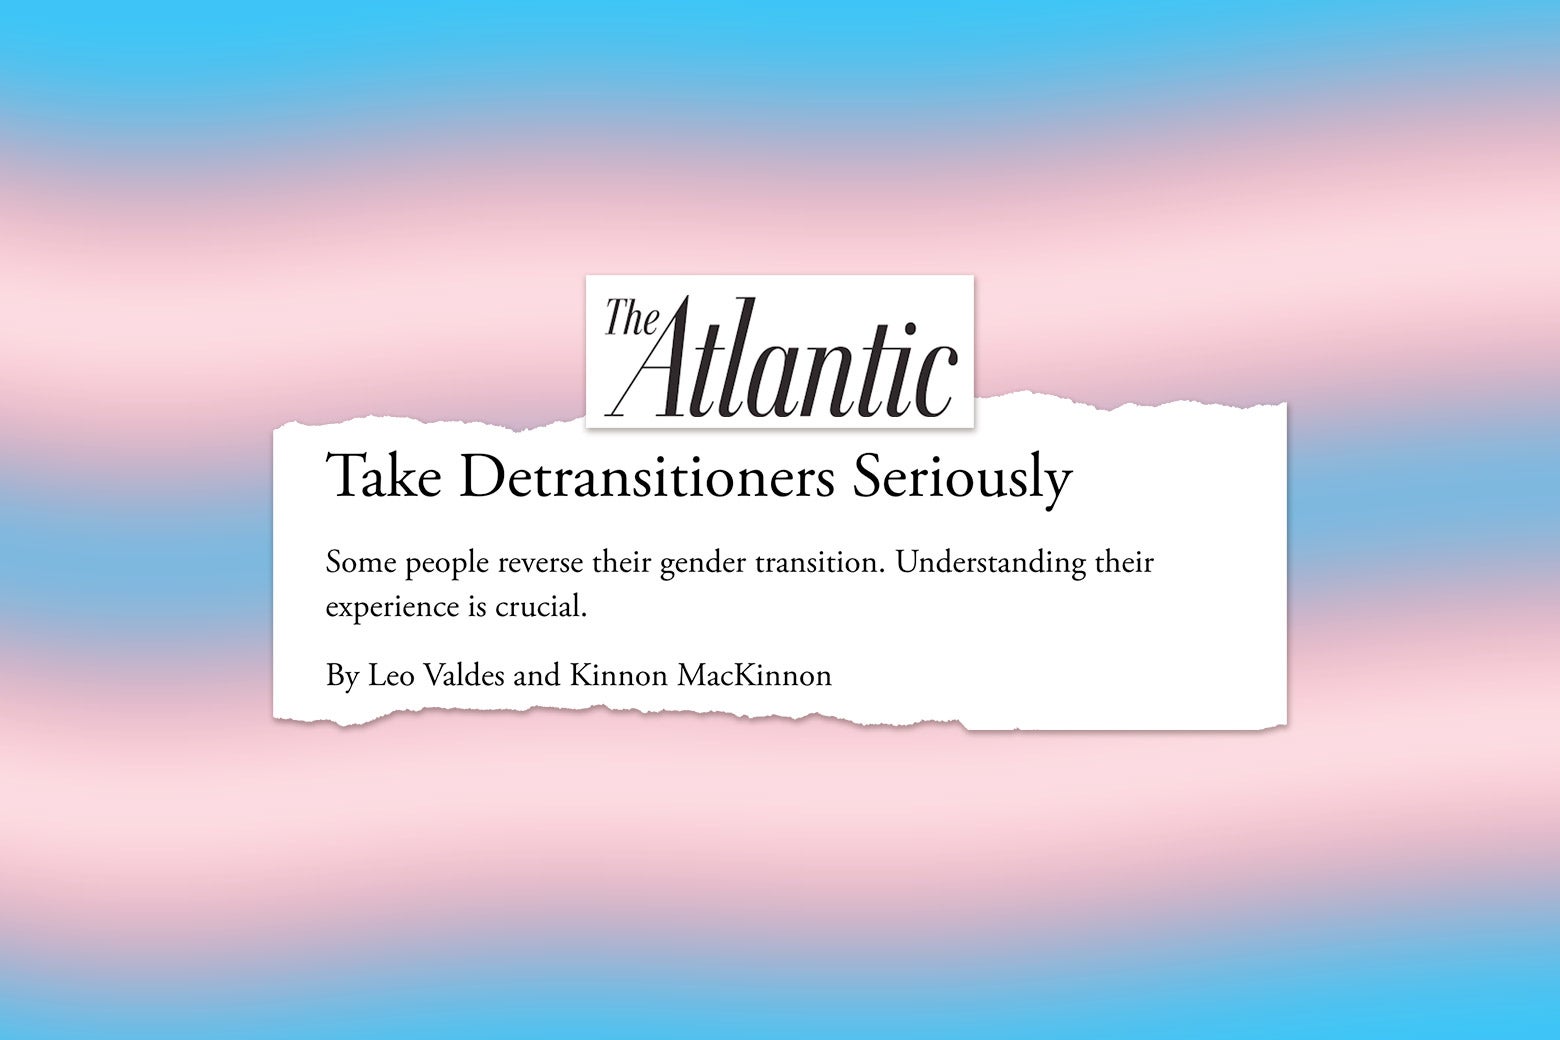 Screenshots from the Atlantic article against a trans flag background.